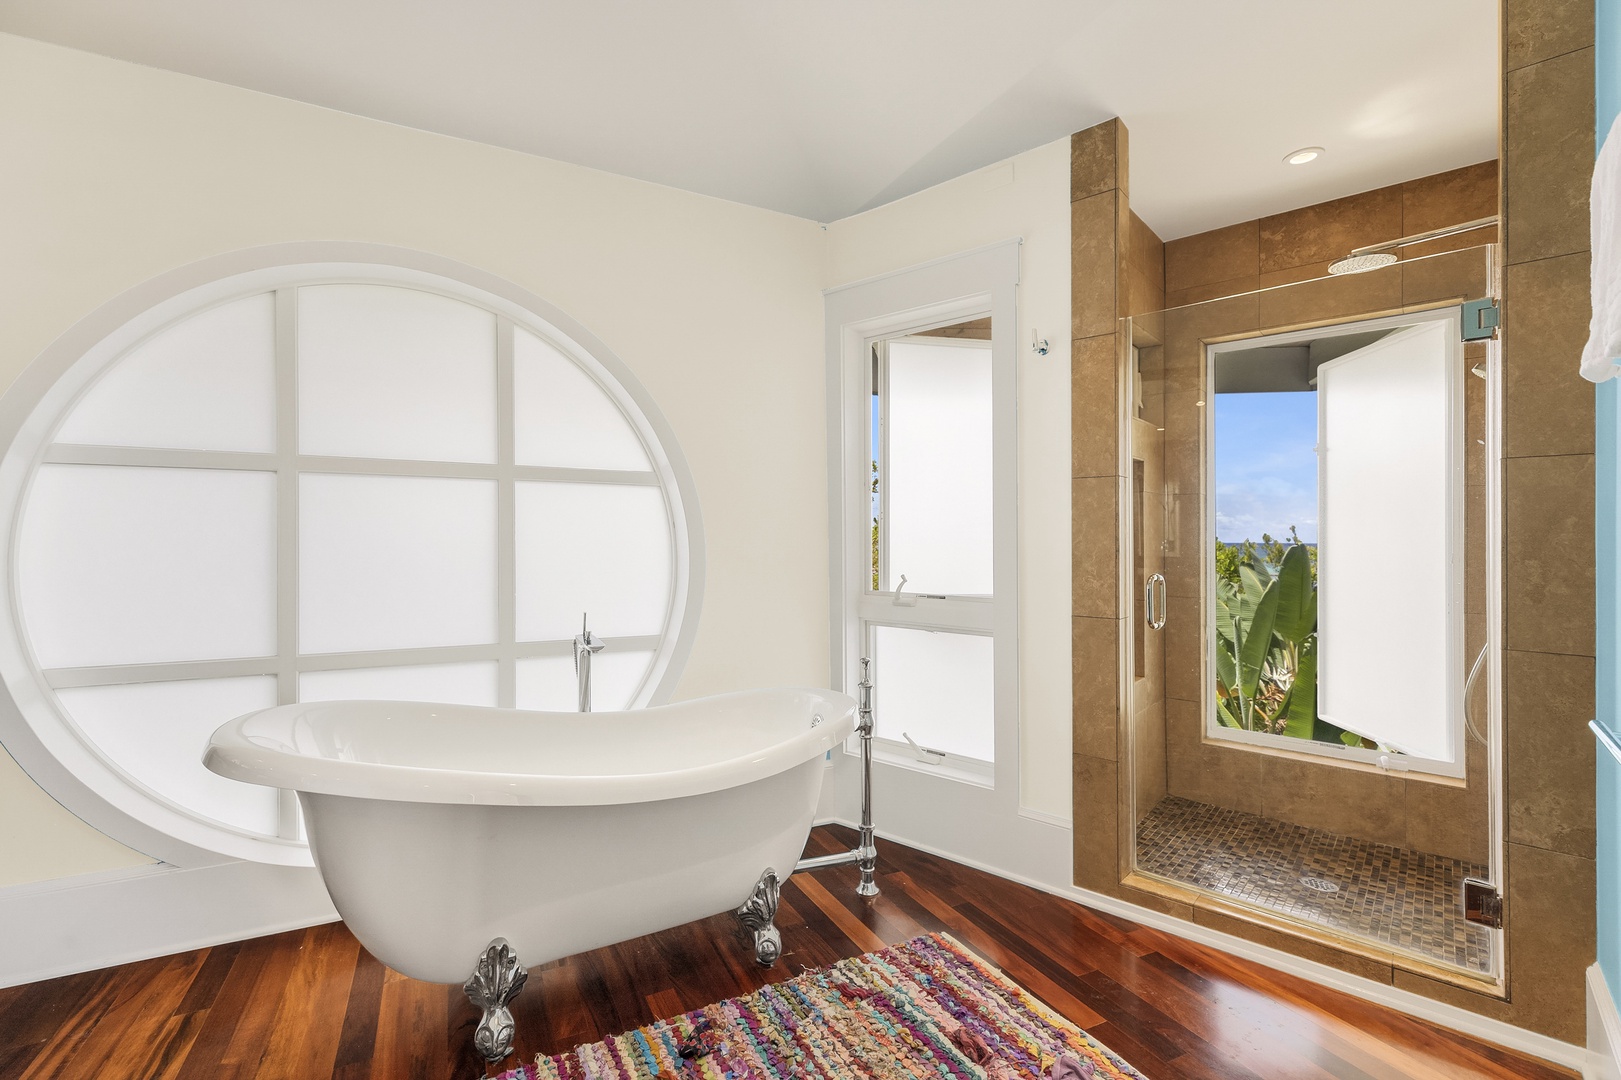 Kailua Vacation Rentals, Lanikai Villa* - Plus, step into the walk-in shower with killer views of the lush, tropical greenery that surrounds